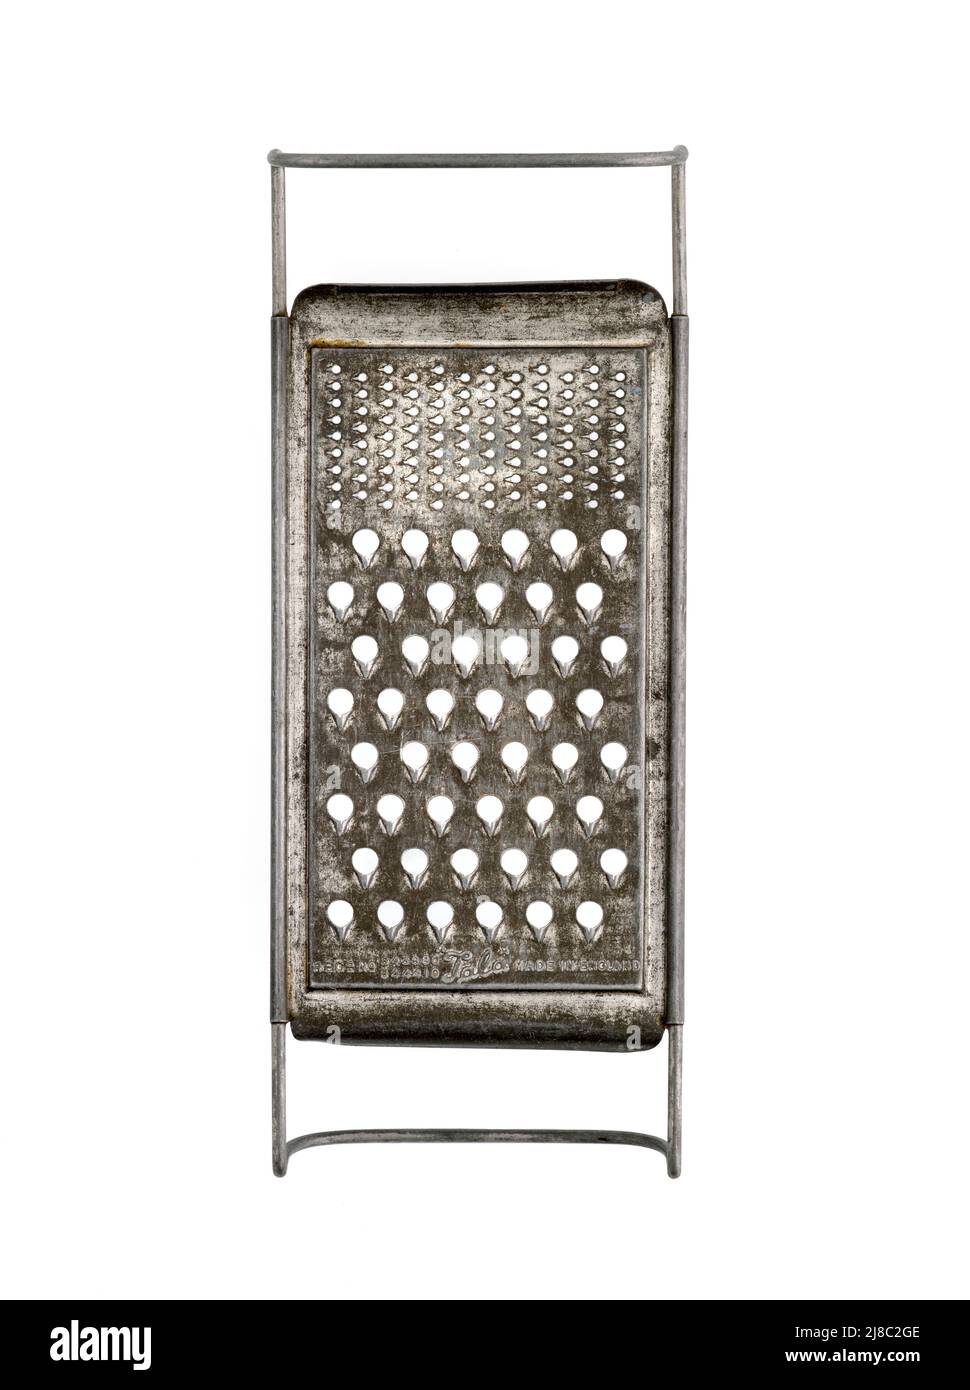 Old Used Kitchen Grater Stock Photo